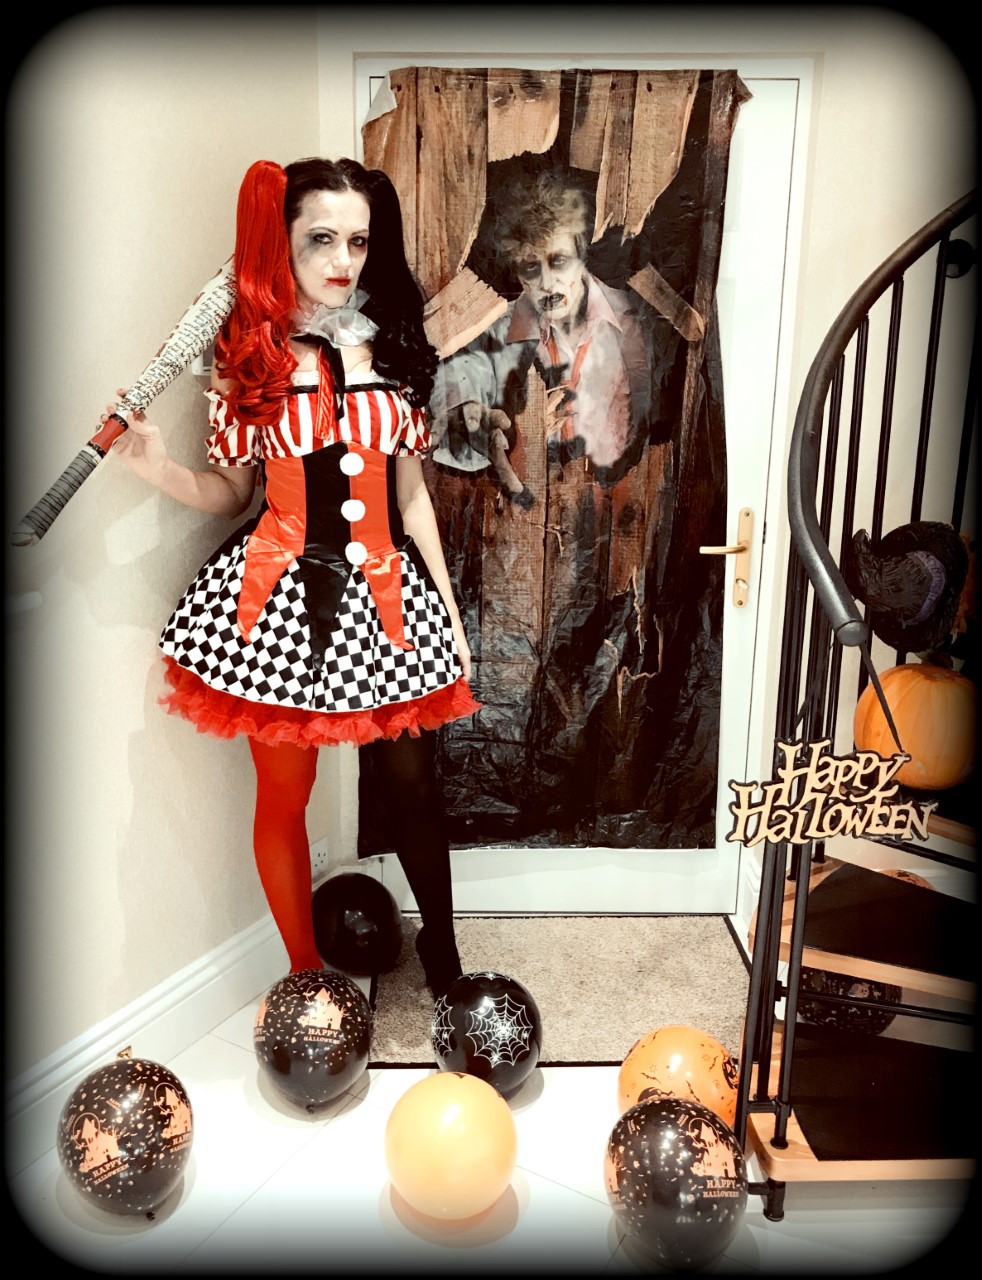 HALLOWEEN HARLEQUIN CLOWN COSTUME | Yves Saint Laurent Couture Mono Eyeshadow, 10 Khol | RED TULLE PETTICOAT | DC WOMEN'S HARLEY QUINN TIGHTS | THEATRICAL BLOOD | Harley Quinn Inflatable Bat | DELUXE RED MAKEUP | Snazaroo White Face Paint 